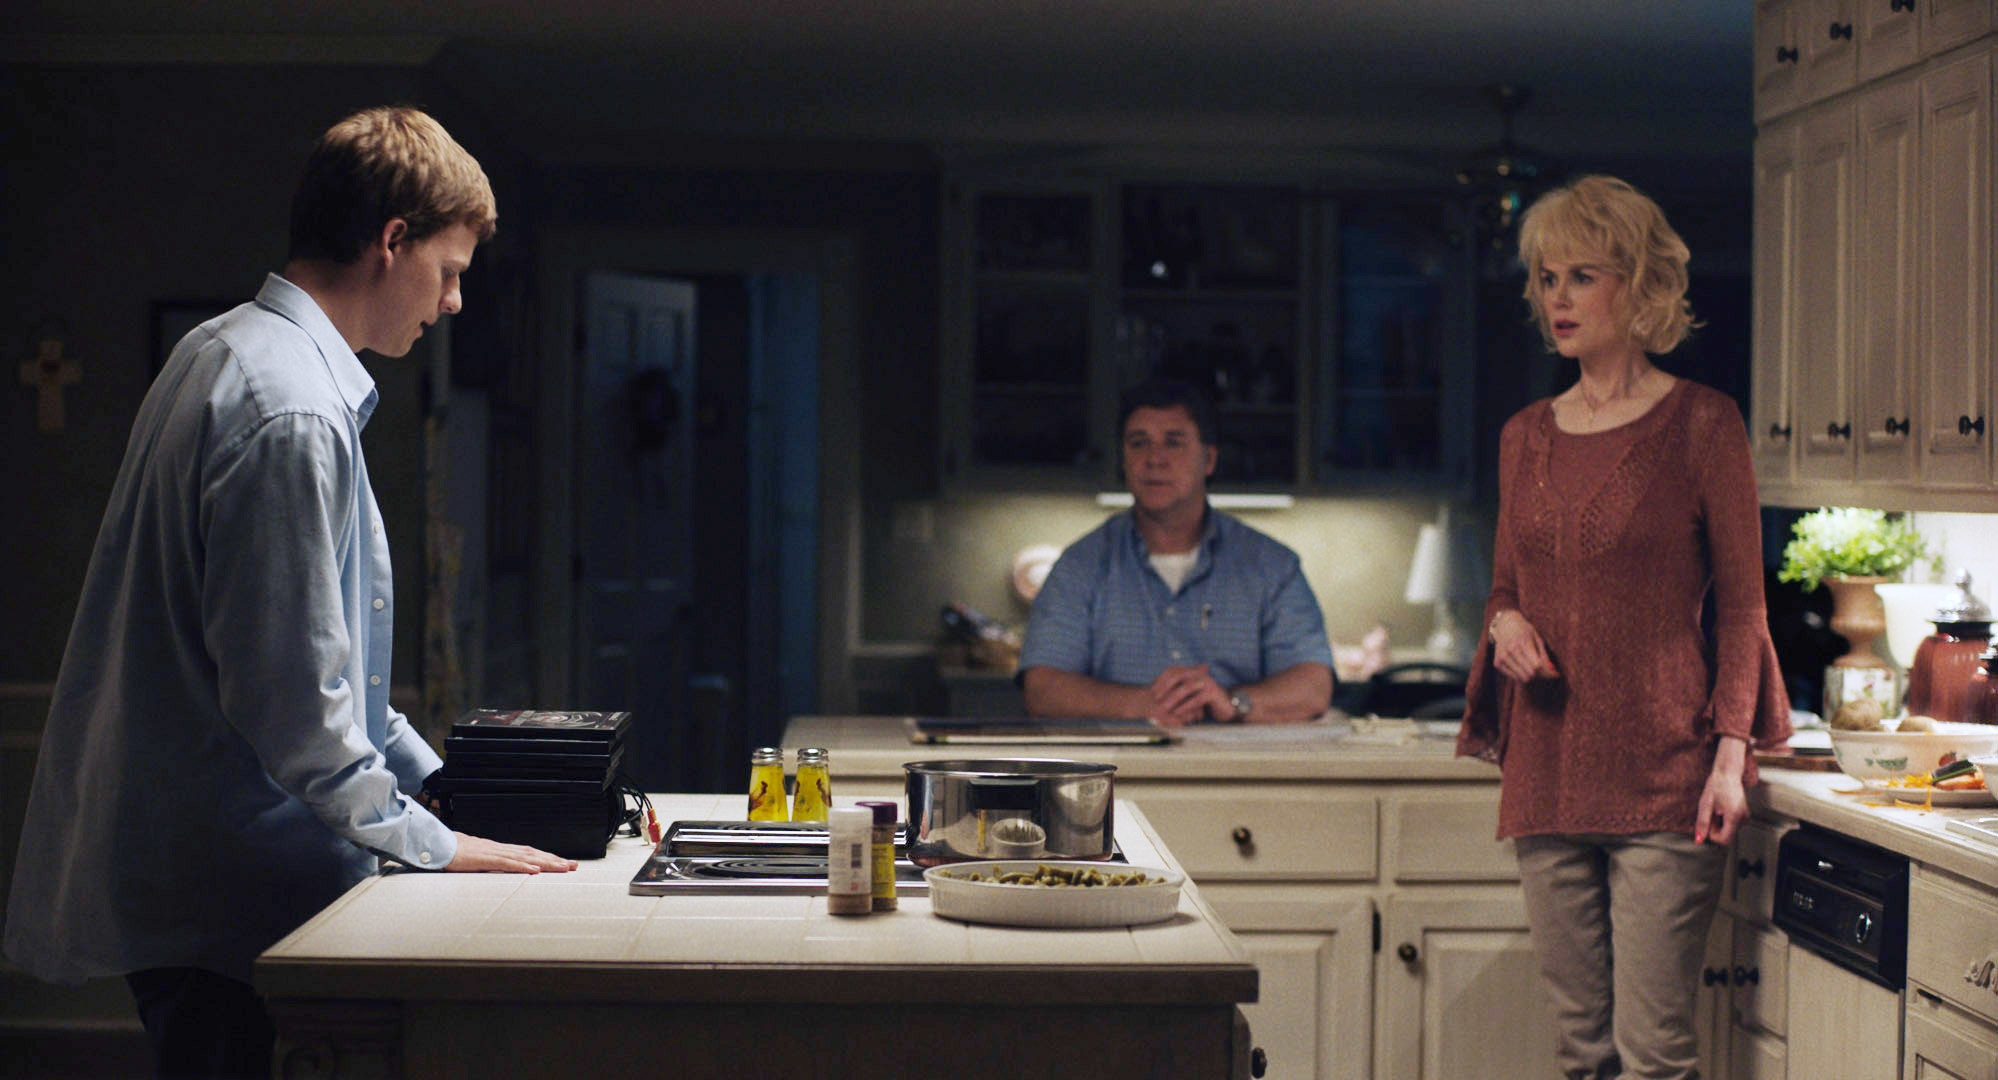 Lucas Hedges, Russell Crowe, and Nicole Kidman have a conversation in a kitchen at night